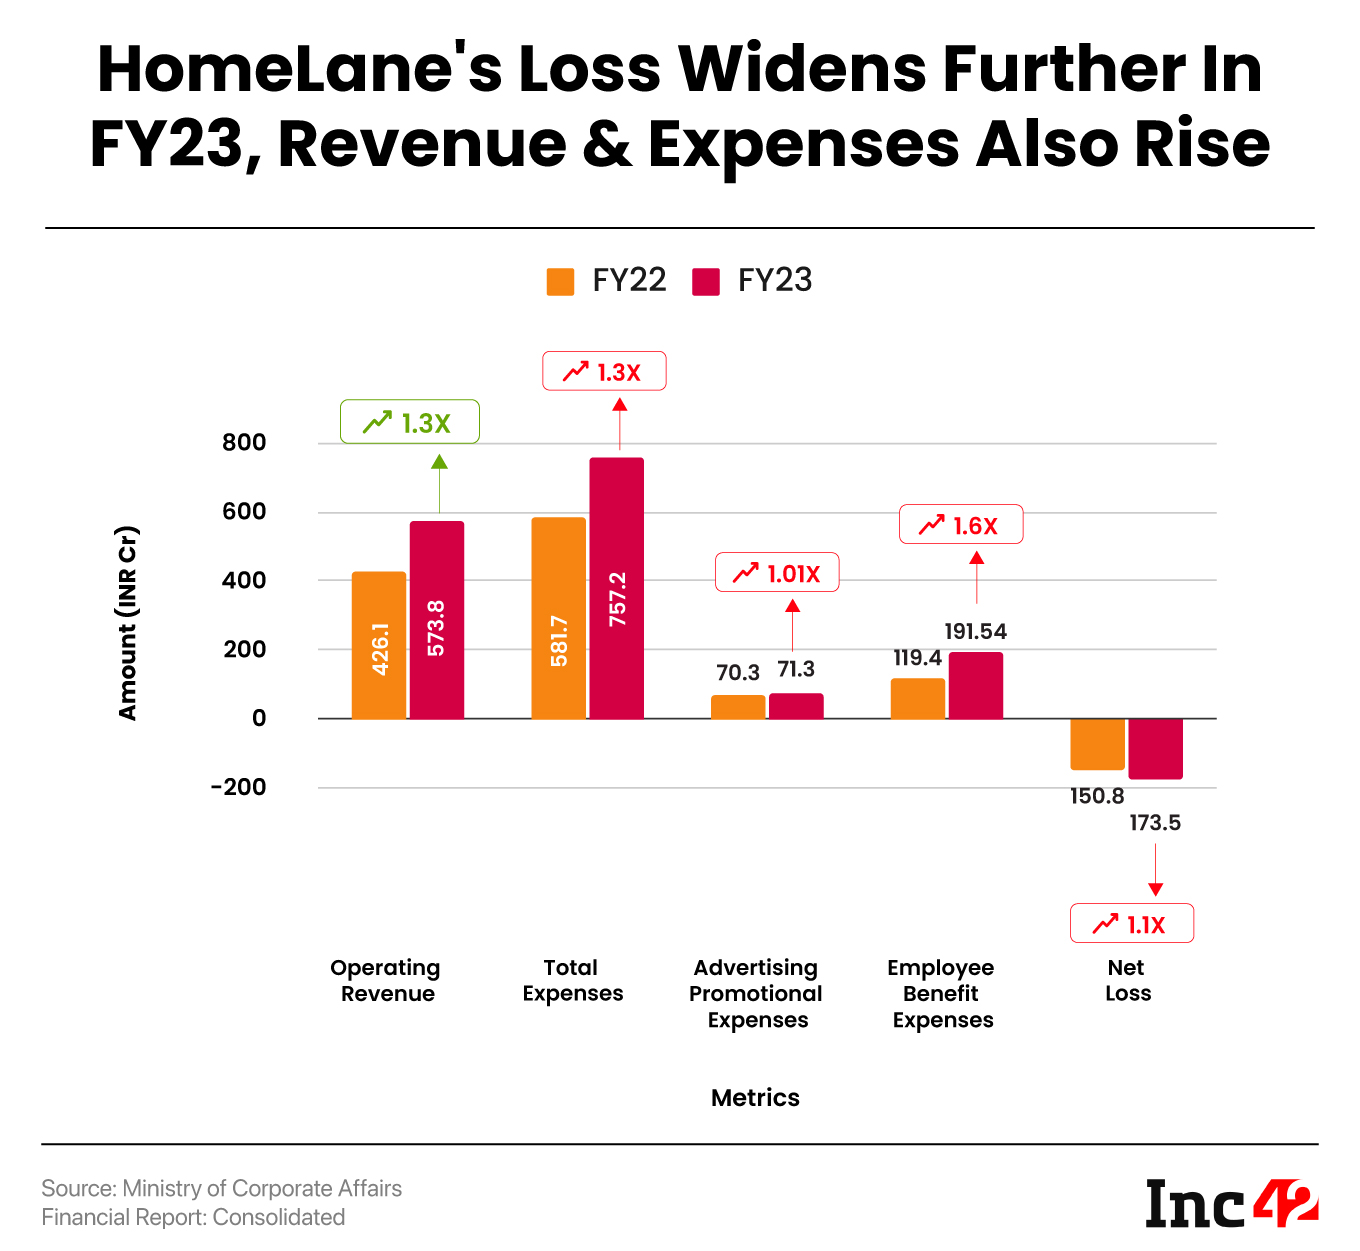 HomeLane's Loss Widens Further In FY23, Revenue & Expenses Also Rise